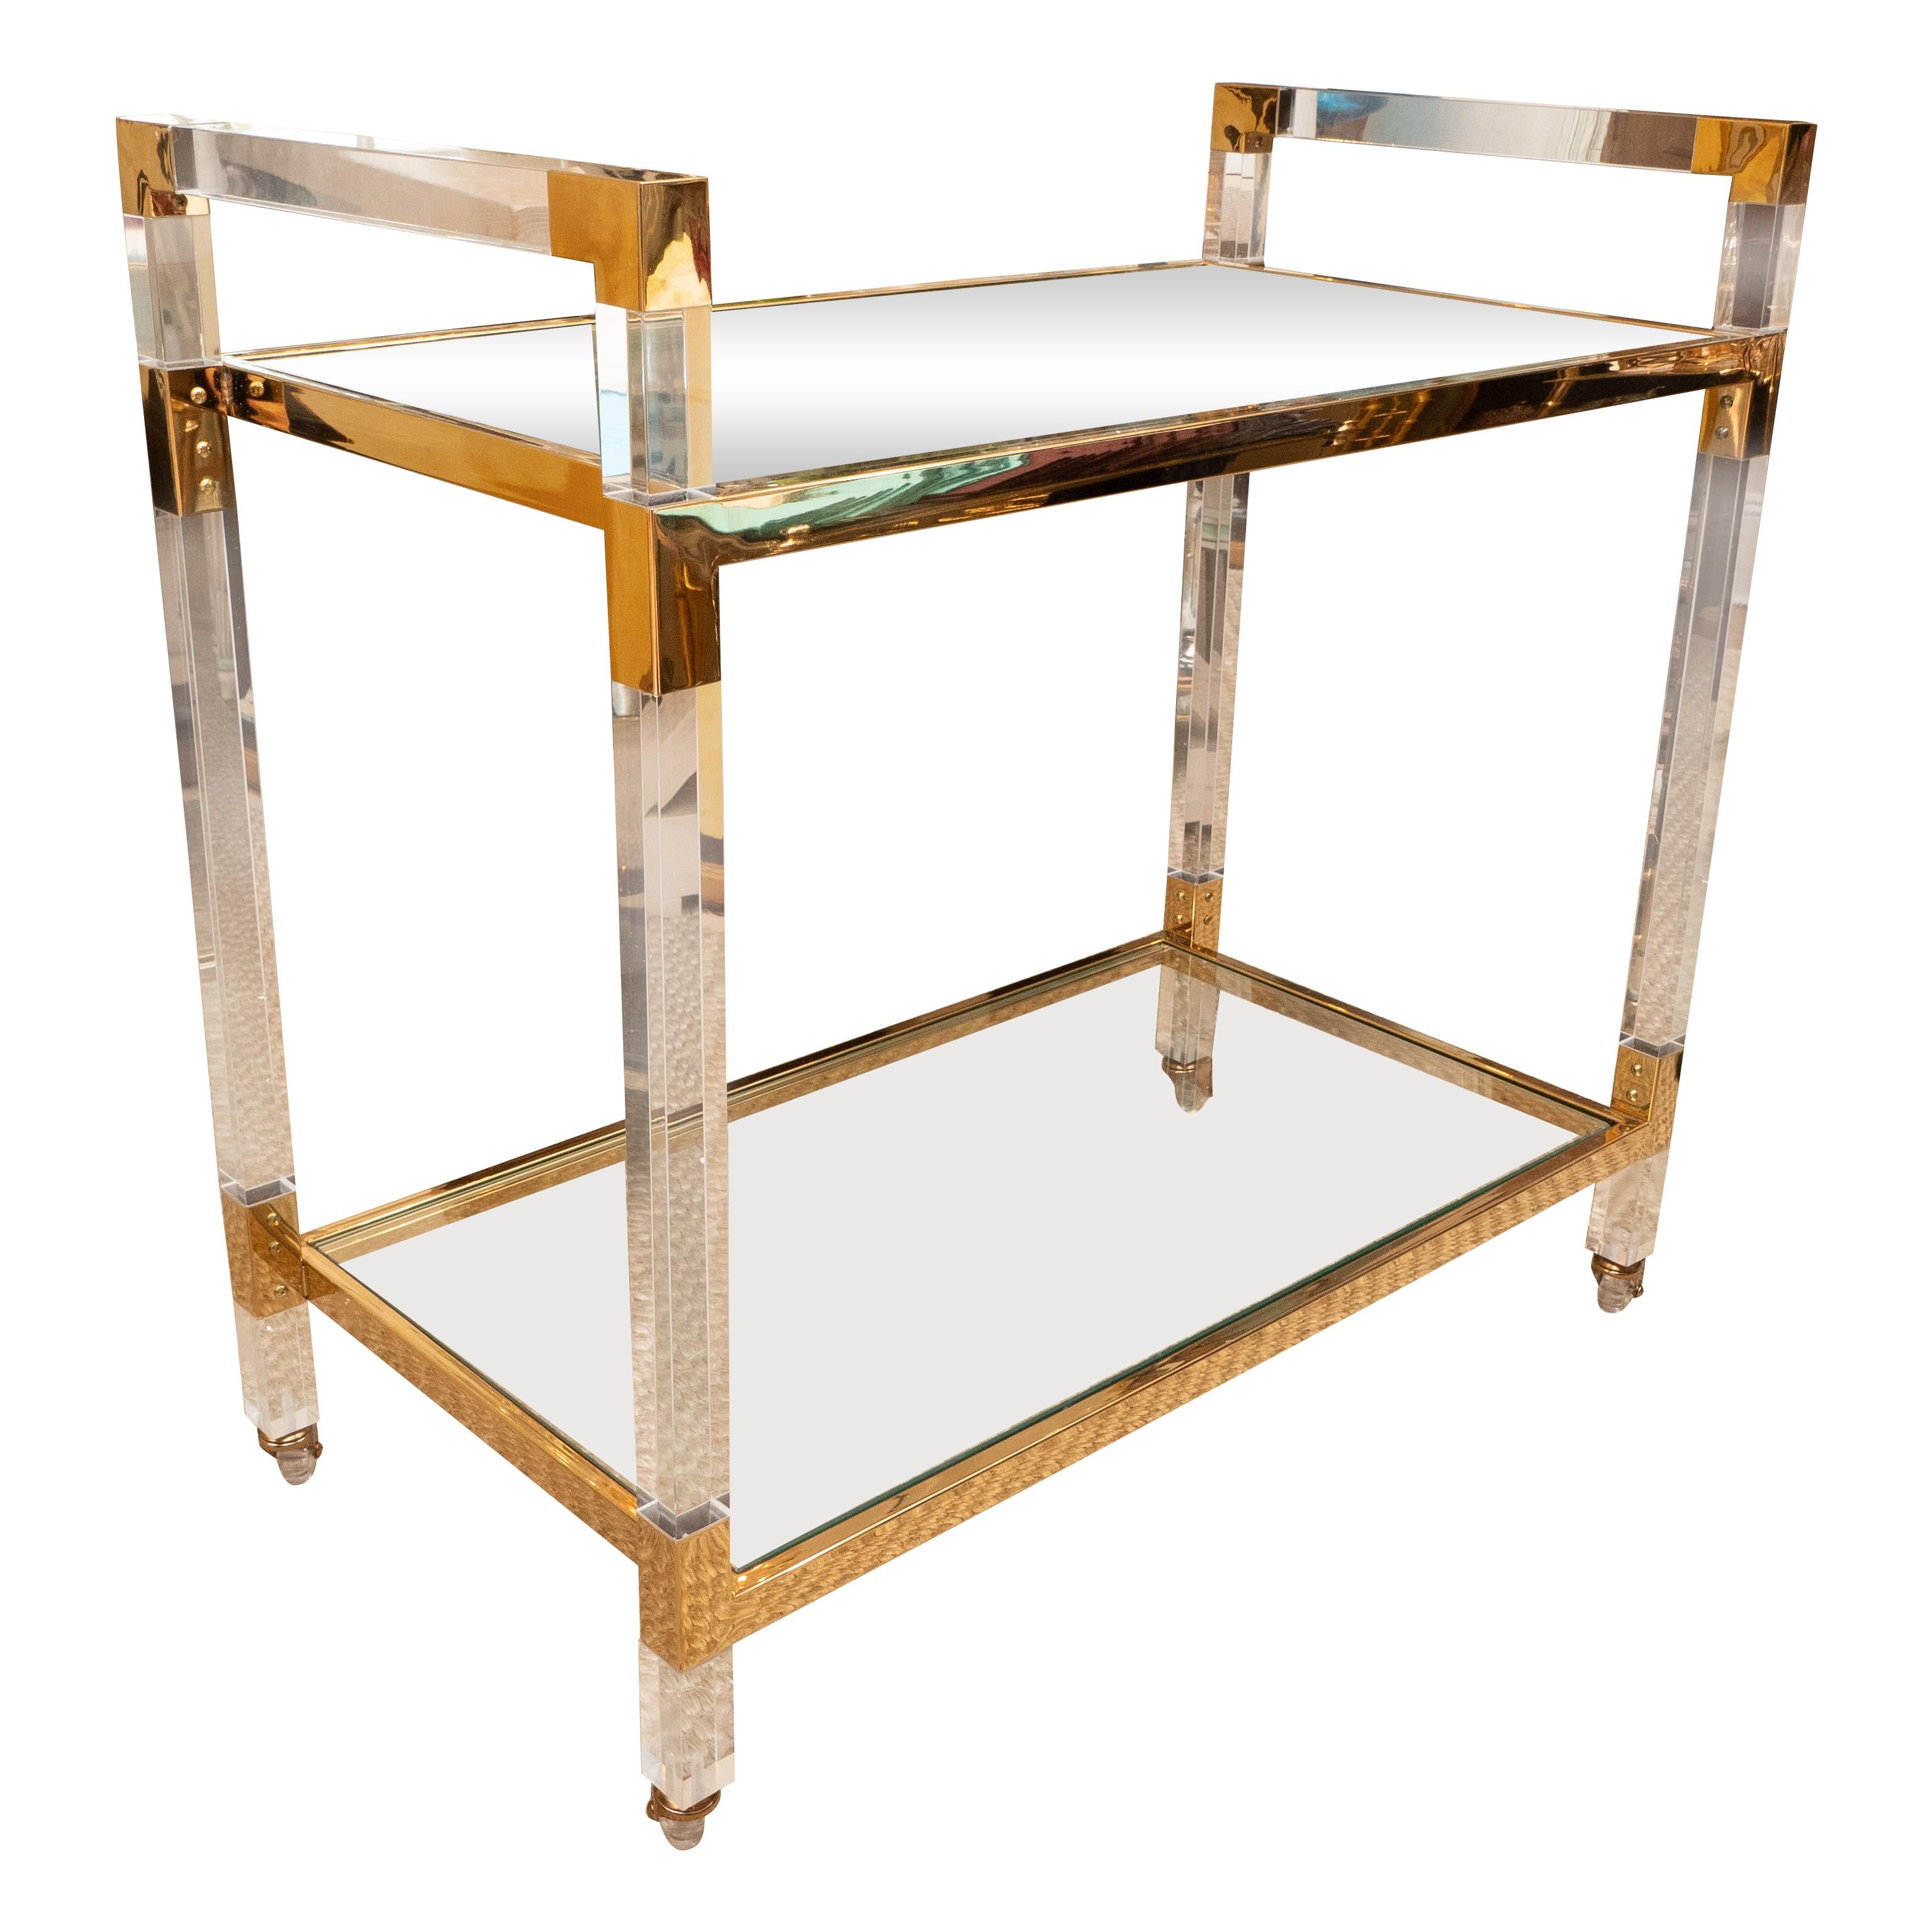 This über chic bar cart will add instant style and glamour to a room. The Lucite frame is accented in brass and holds two glass shelves. The piece sits on castors for easy movement. Despite its light and 